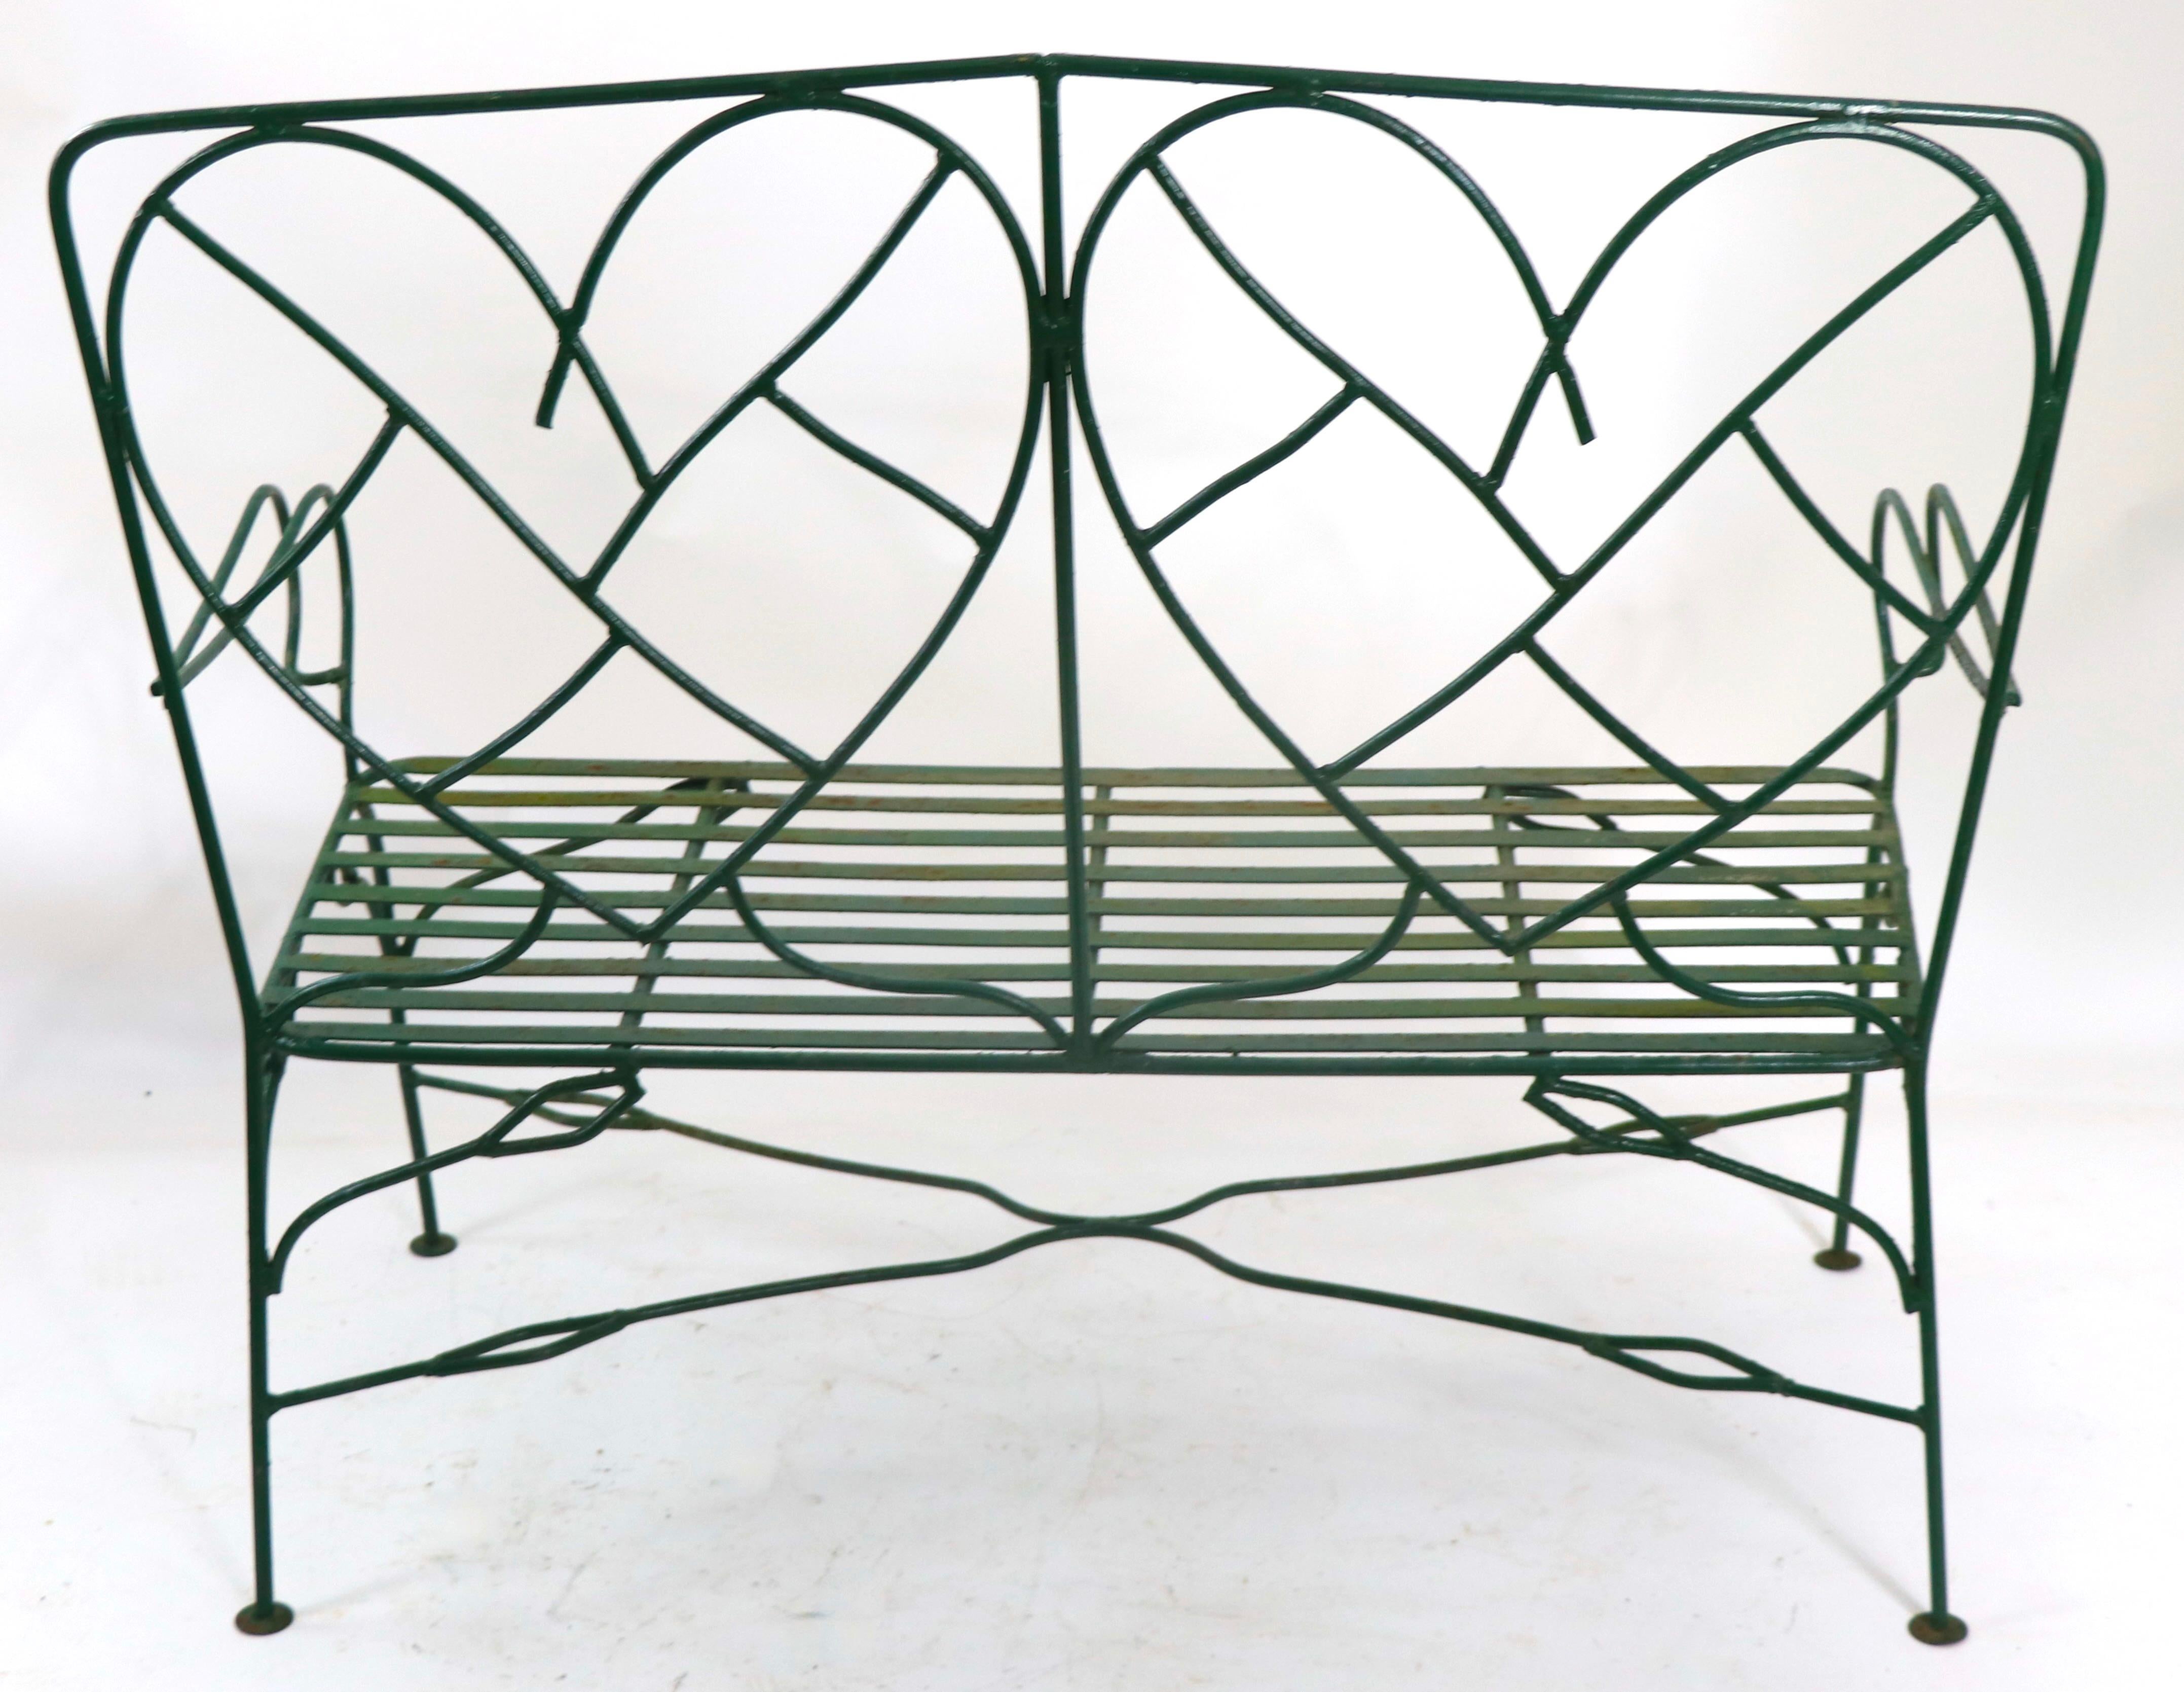 20th Century Hand Wrought Iron Settee Bench W Decorative Heart Shaped Metalwork Backrest 